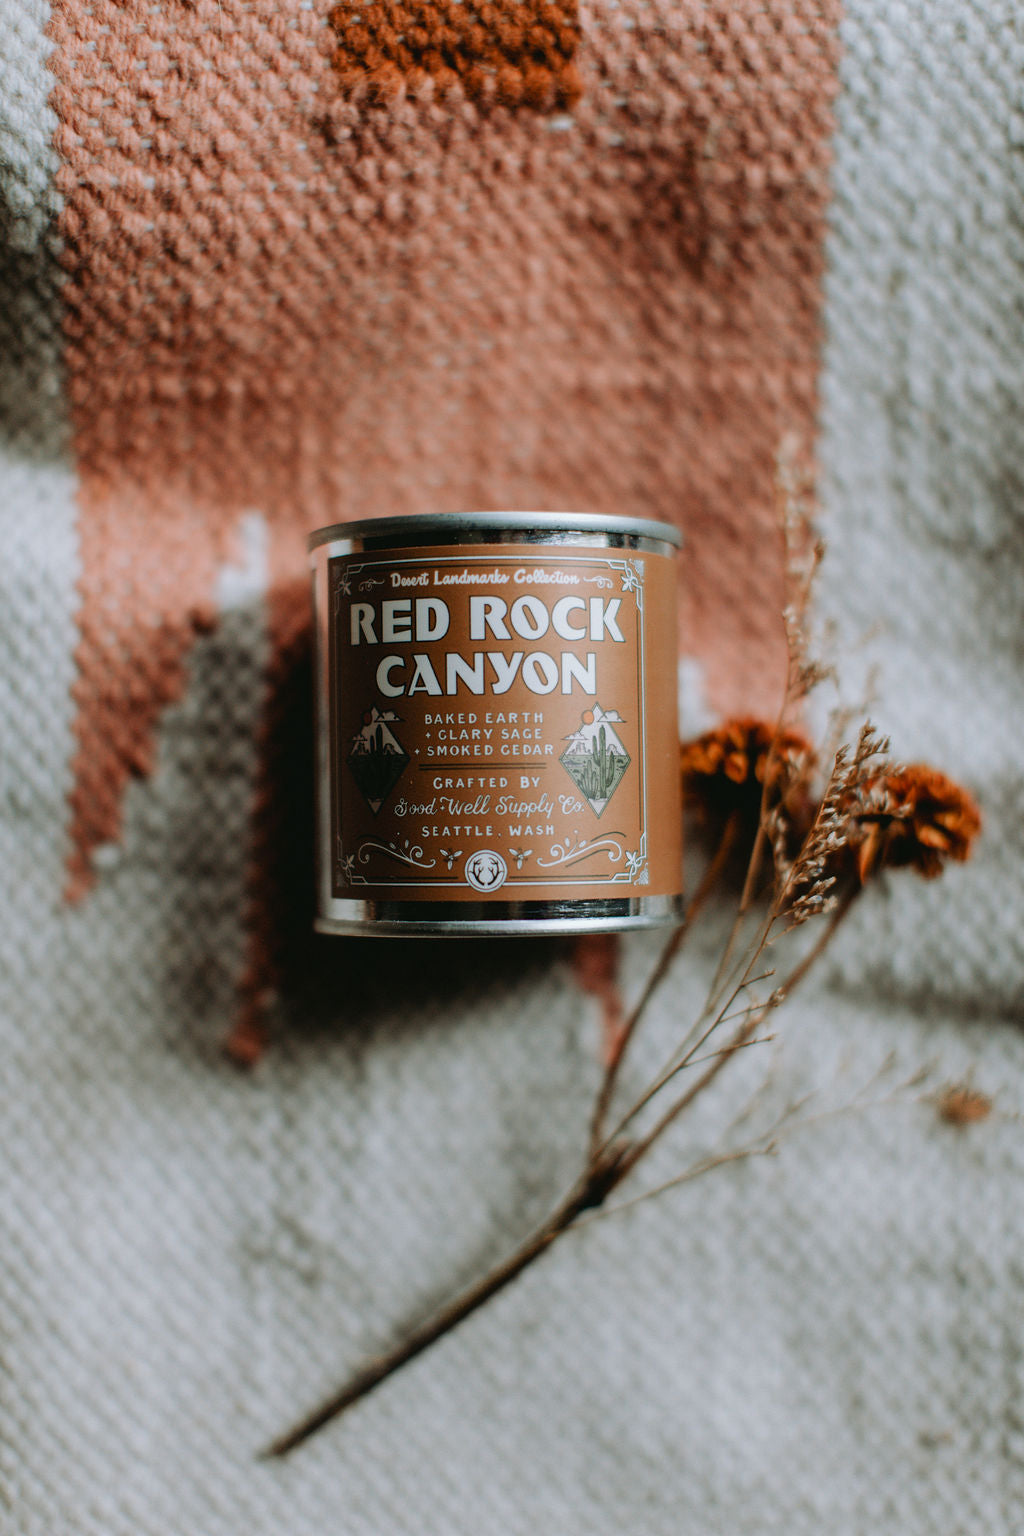 Red Rock Canyon Desert Landscapes Candle